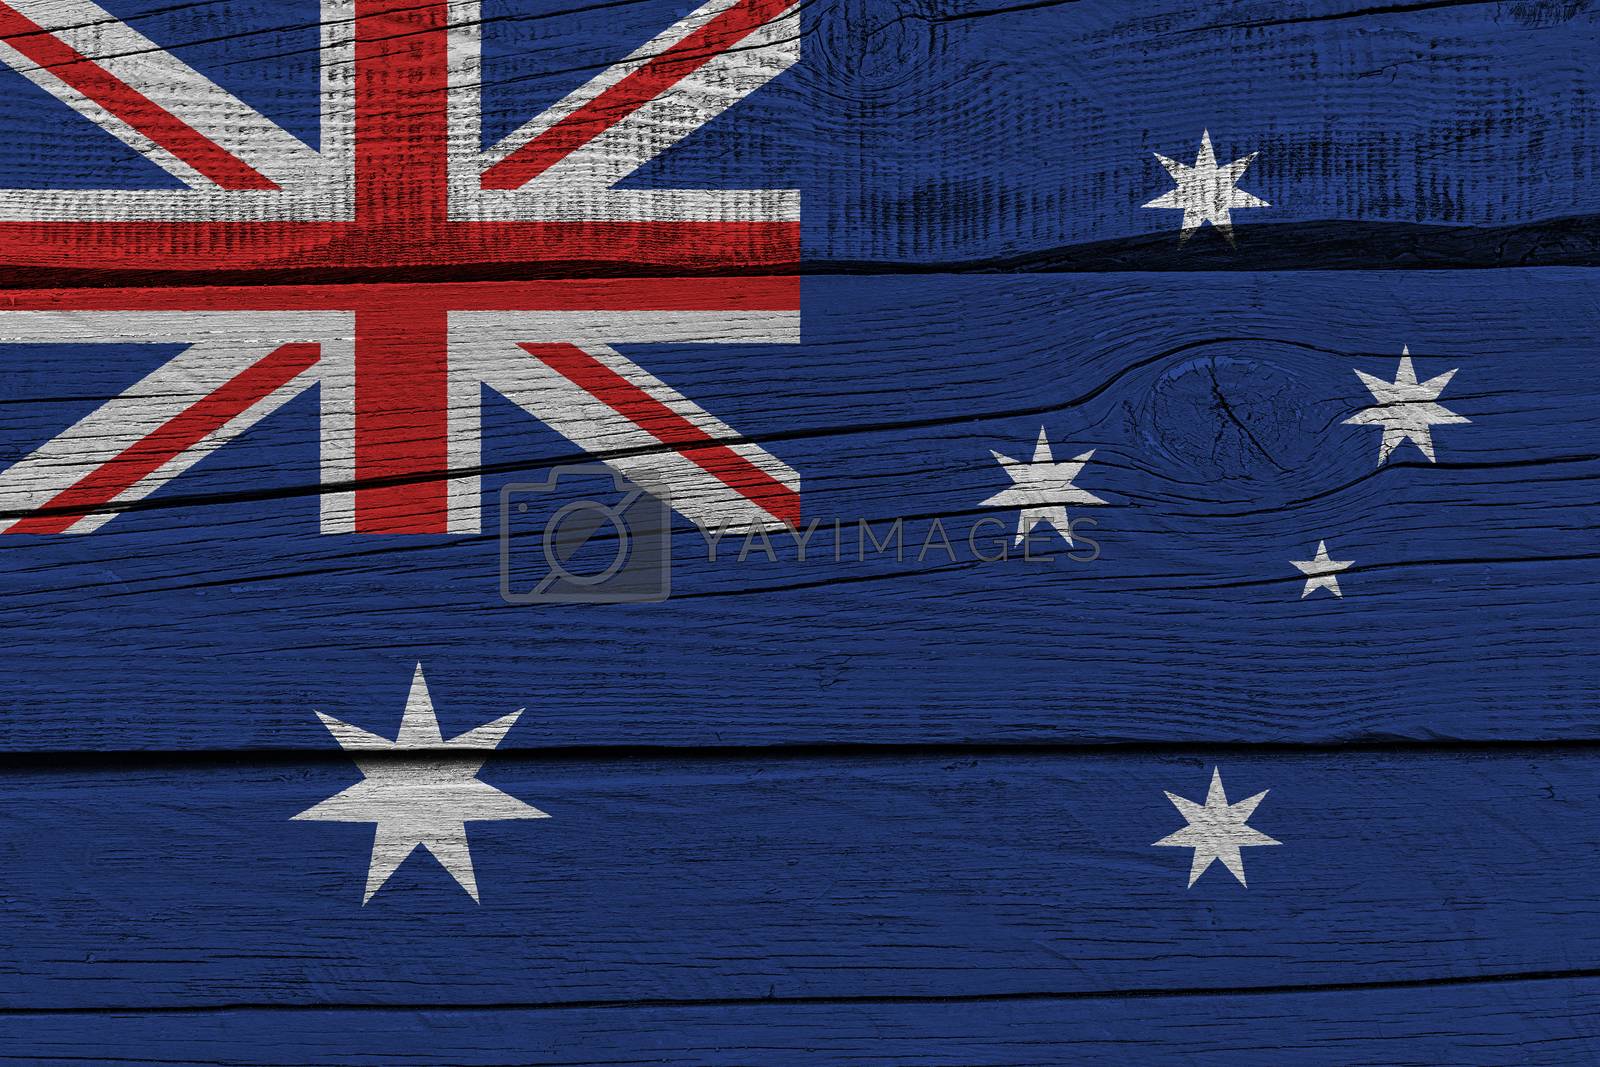 Royalty free image of Australia flag painted on old wood plank by Visual-Content